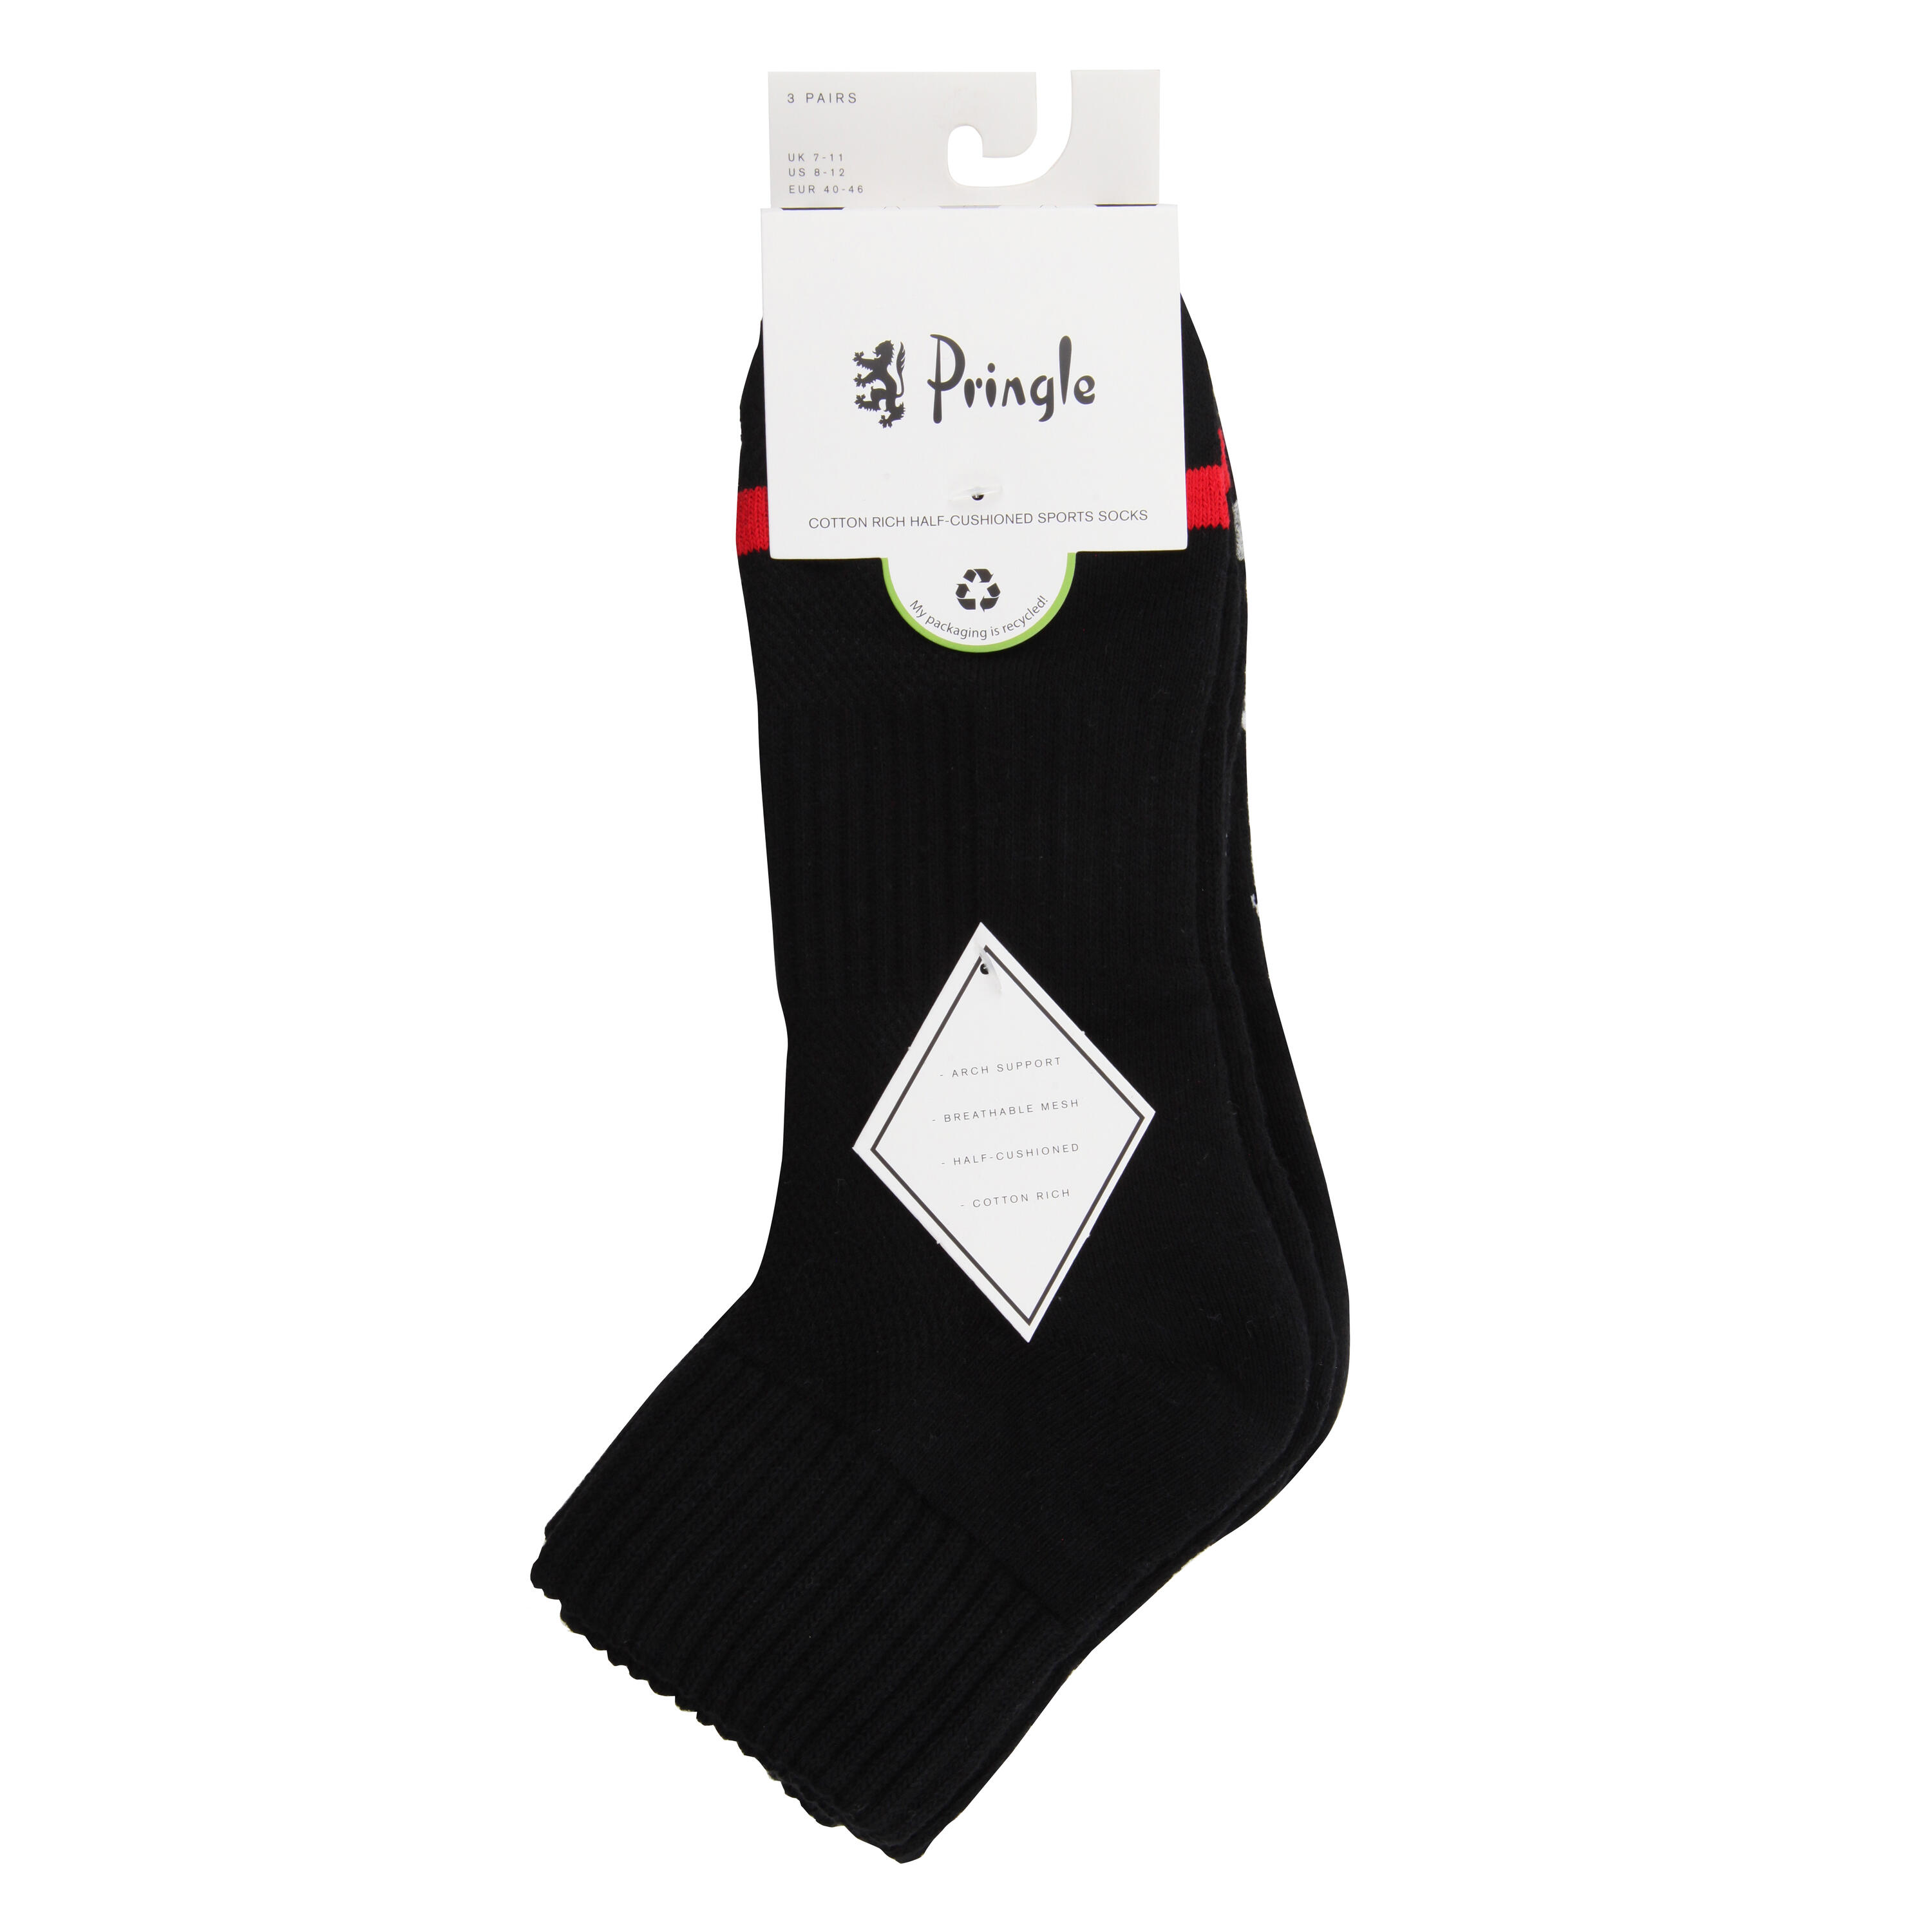 Mens Quarter Length Sports Socks with Half Cushioned Foot and Arch ...